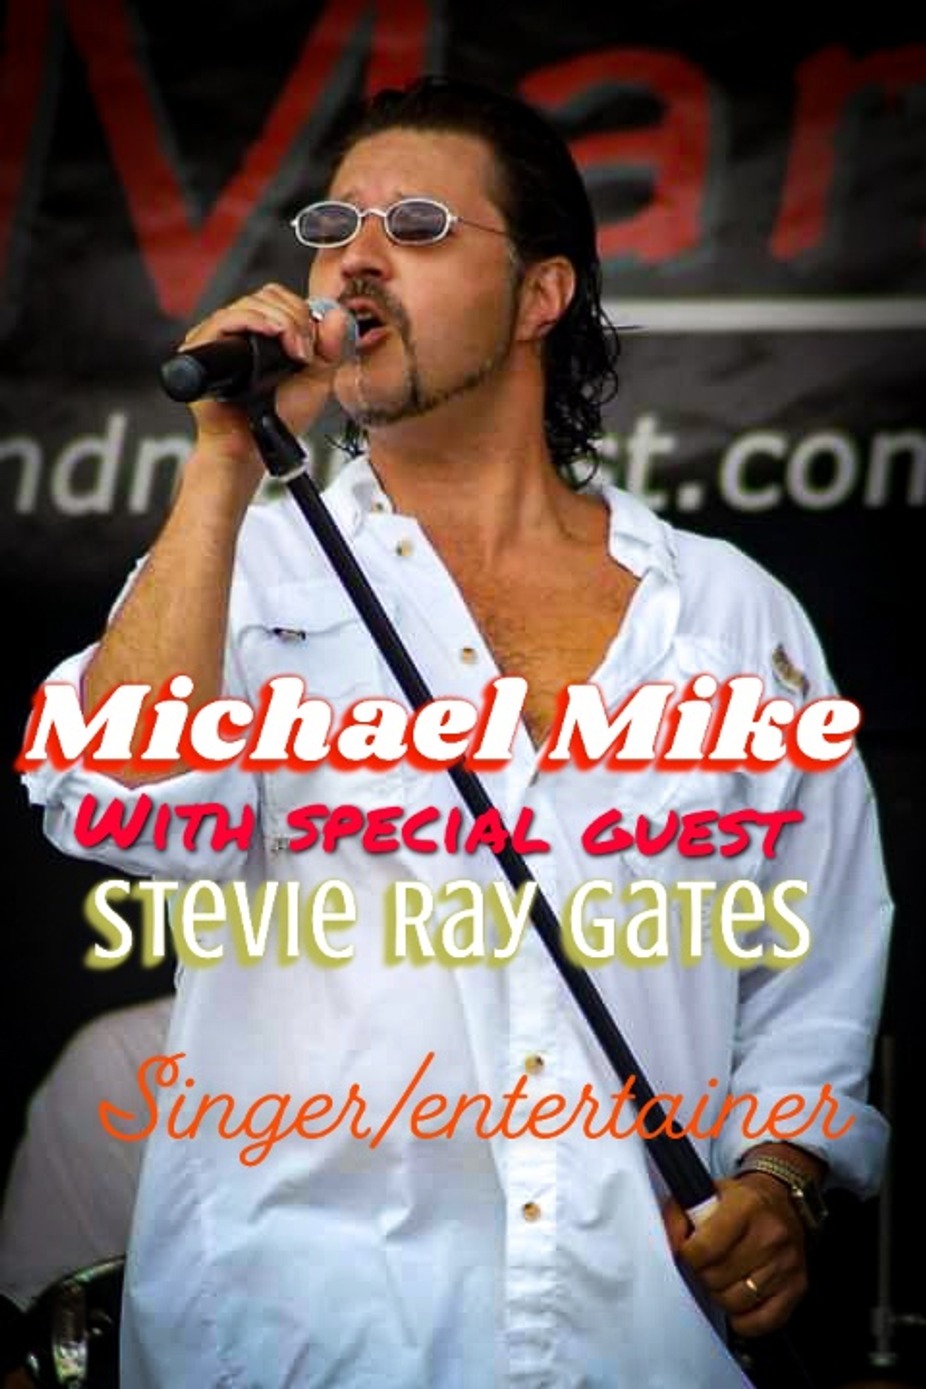 Live Music with Michael Mike event photo